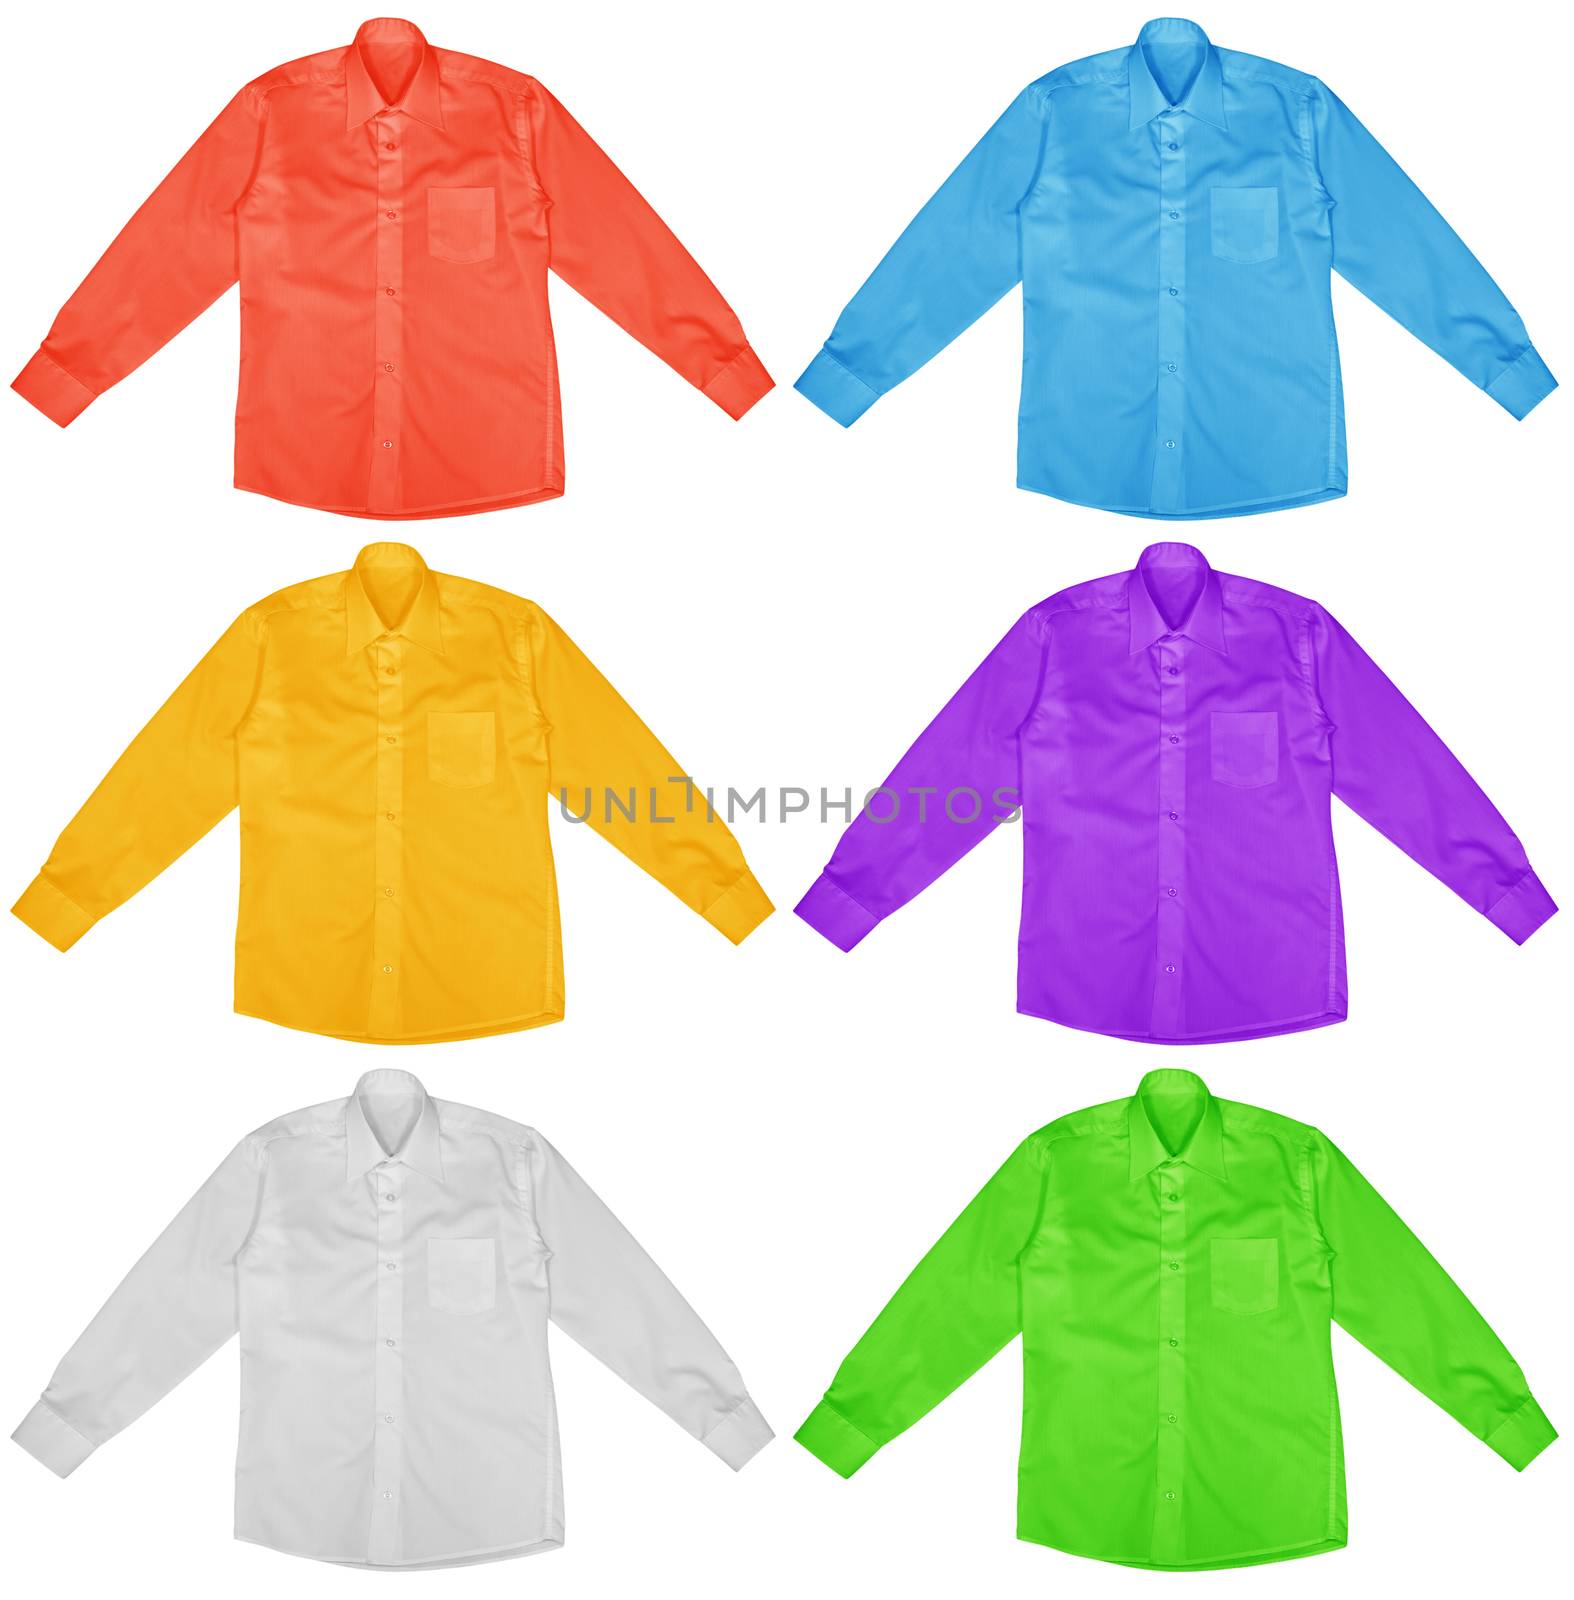 Colorful shirts with long sleeves isolated on white background.